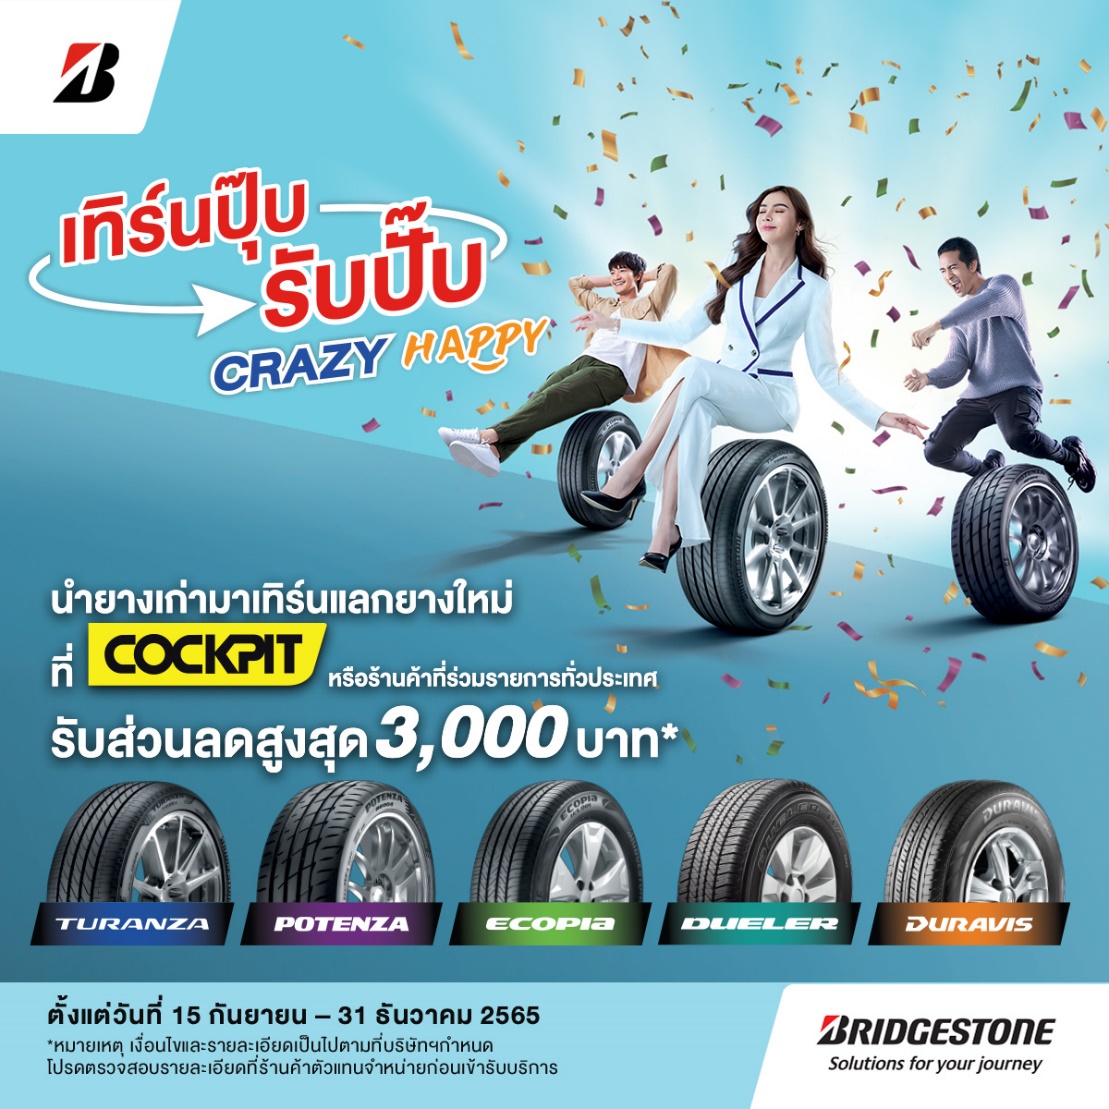 Bridgestone Launches CRAZY HAPPY Promotion, Trade in Your Old Tires with New Ones and Get a Maximum Discount of 3,000 Baht by the End of This Year